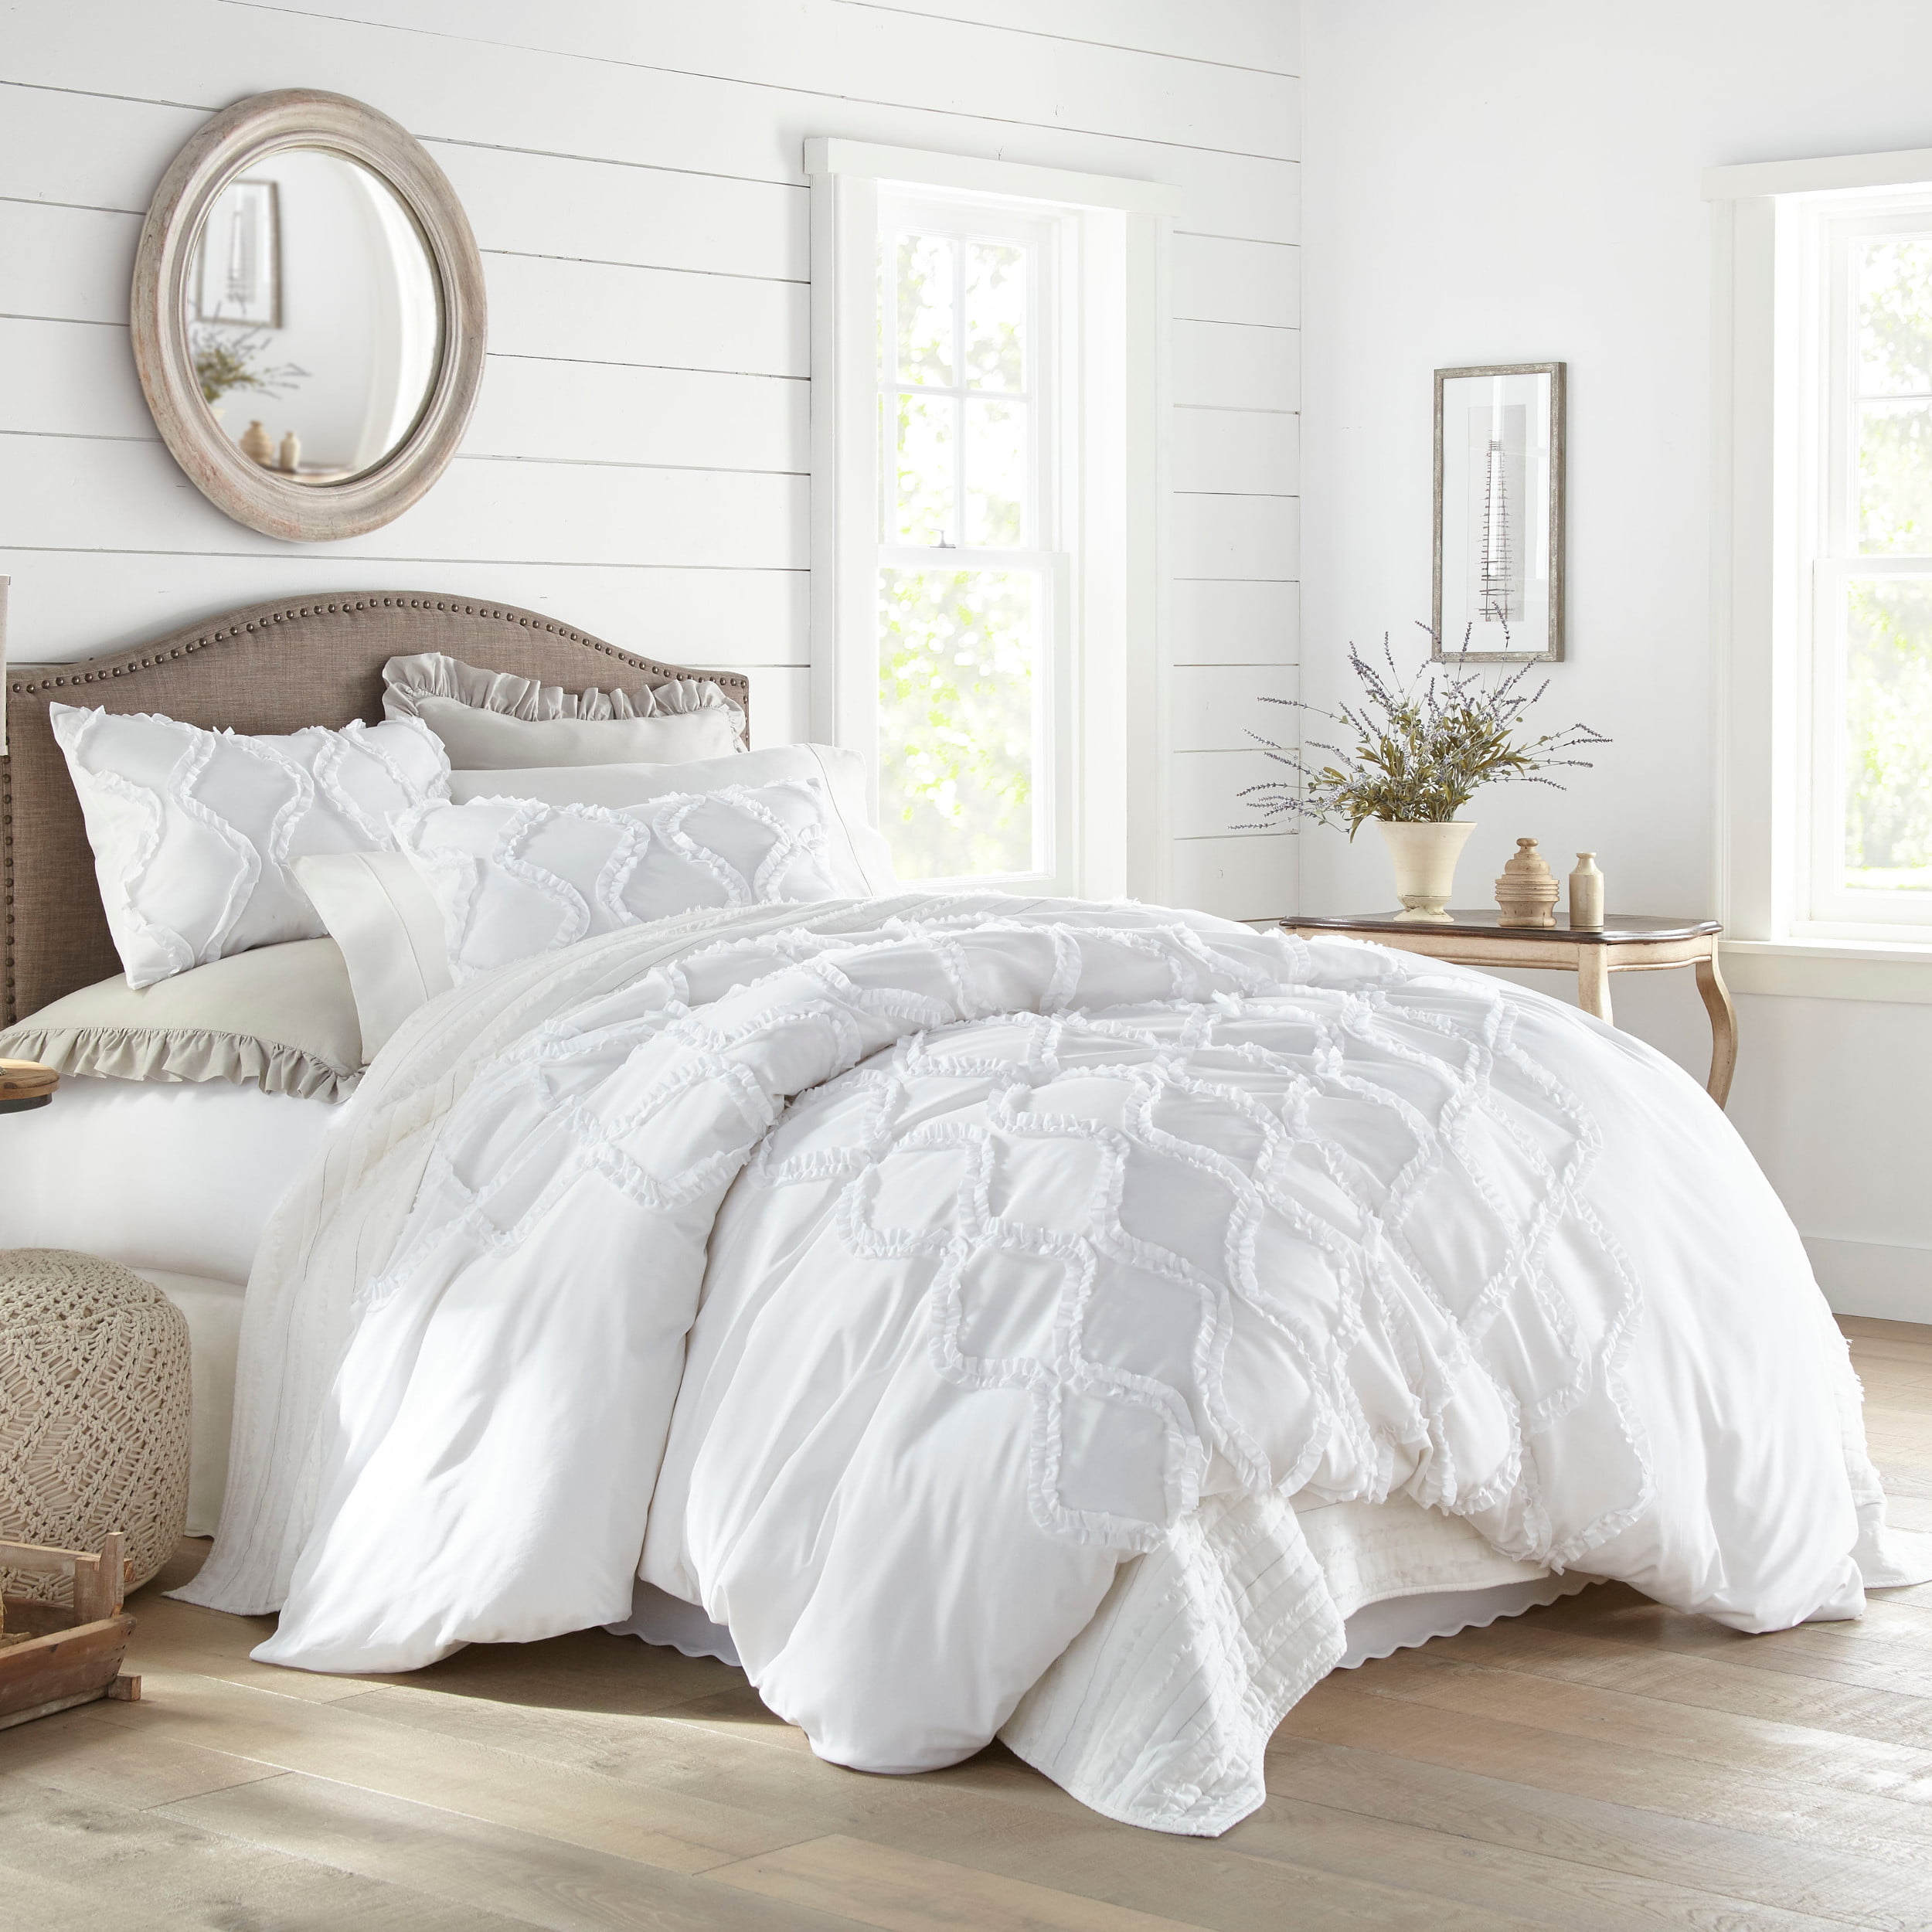 Stone Cottage Anne Ruffle Ogee 180 Thread Count 3 Piece Duvet Sets, Queen